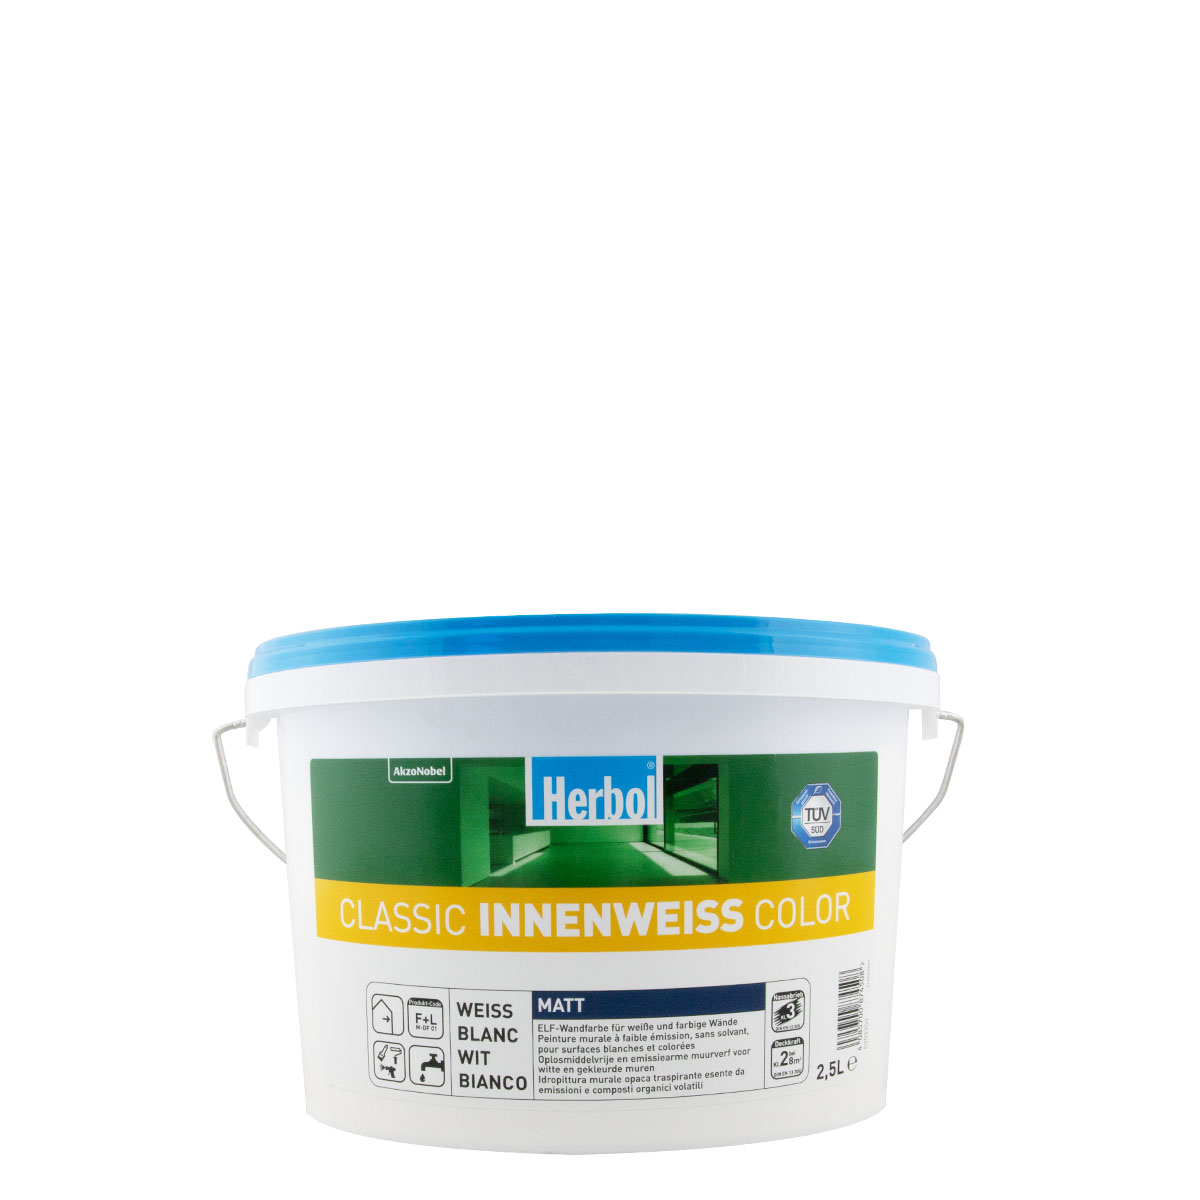 Herbol Classic Innenweiss Color 2,5L weiss Wandfarbe